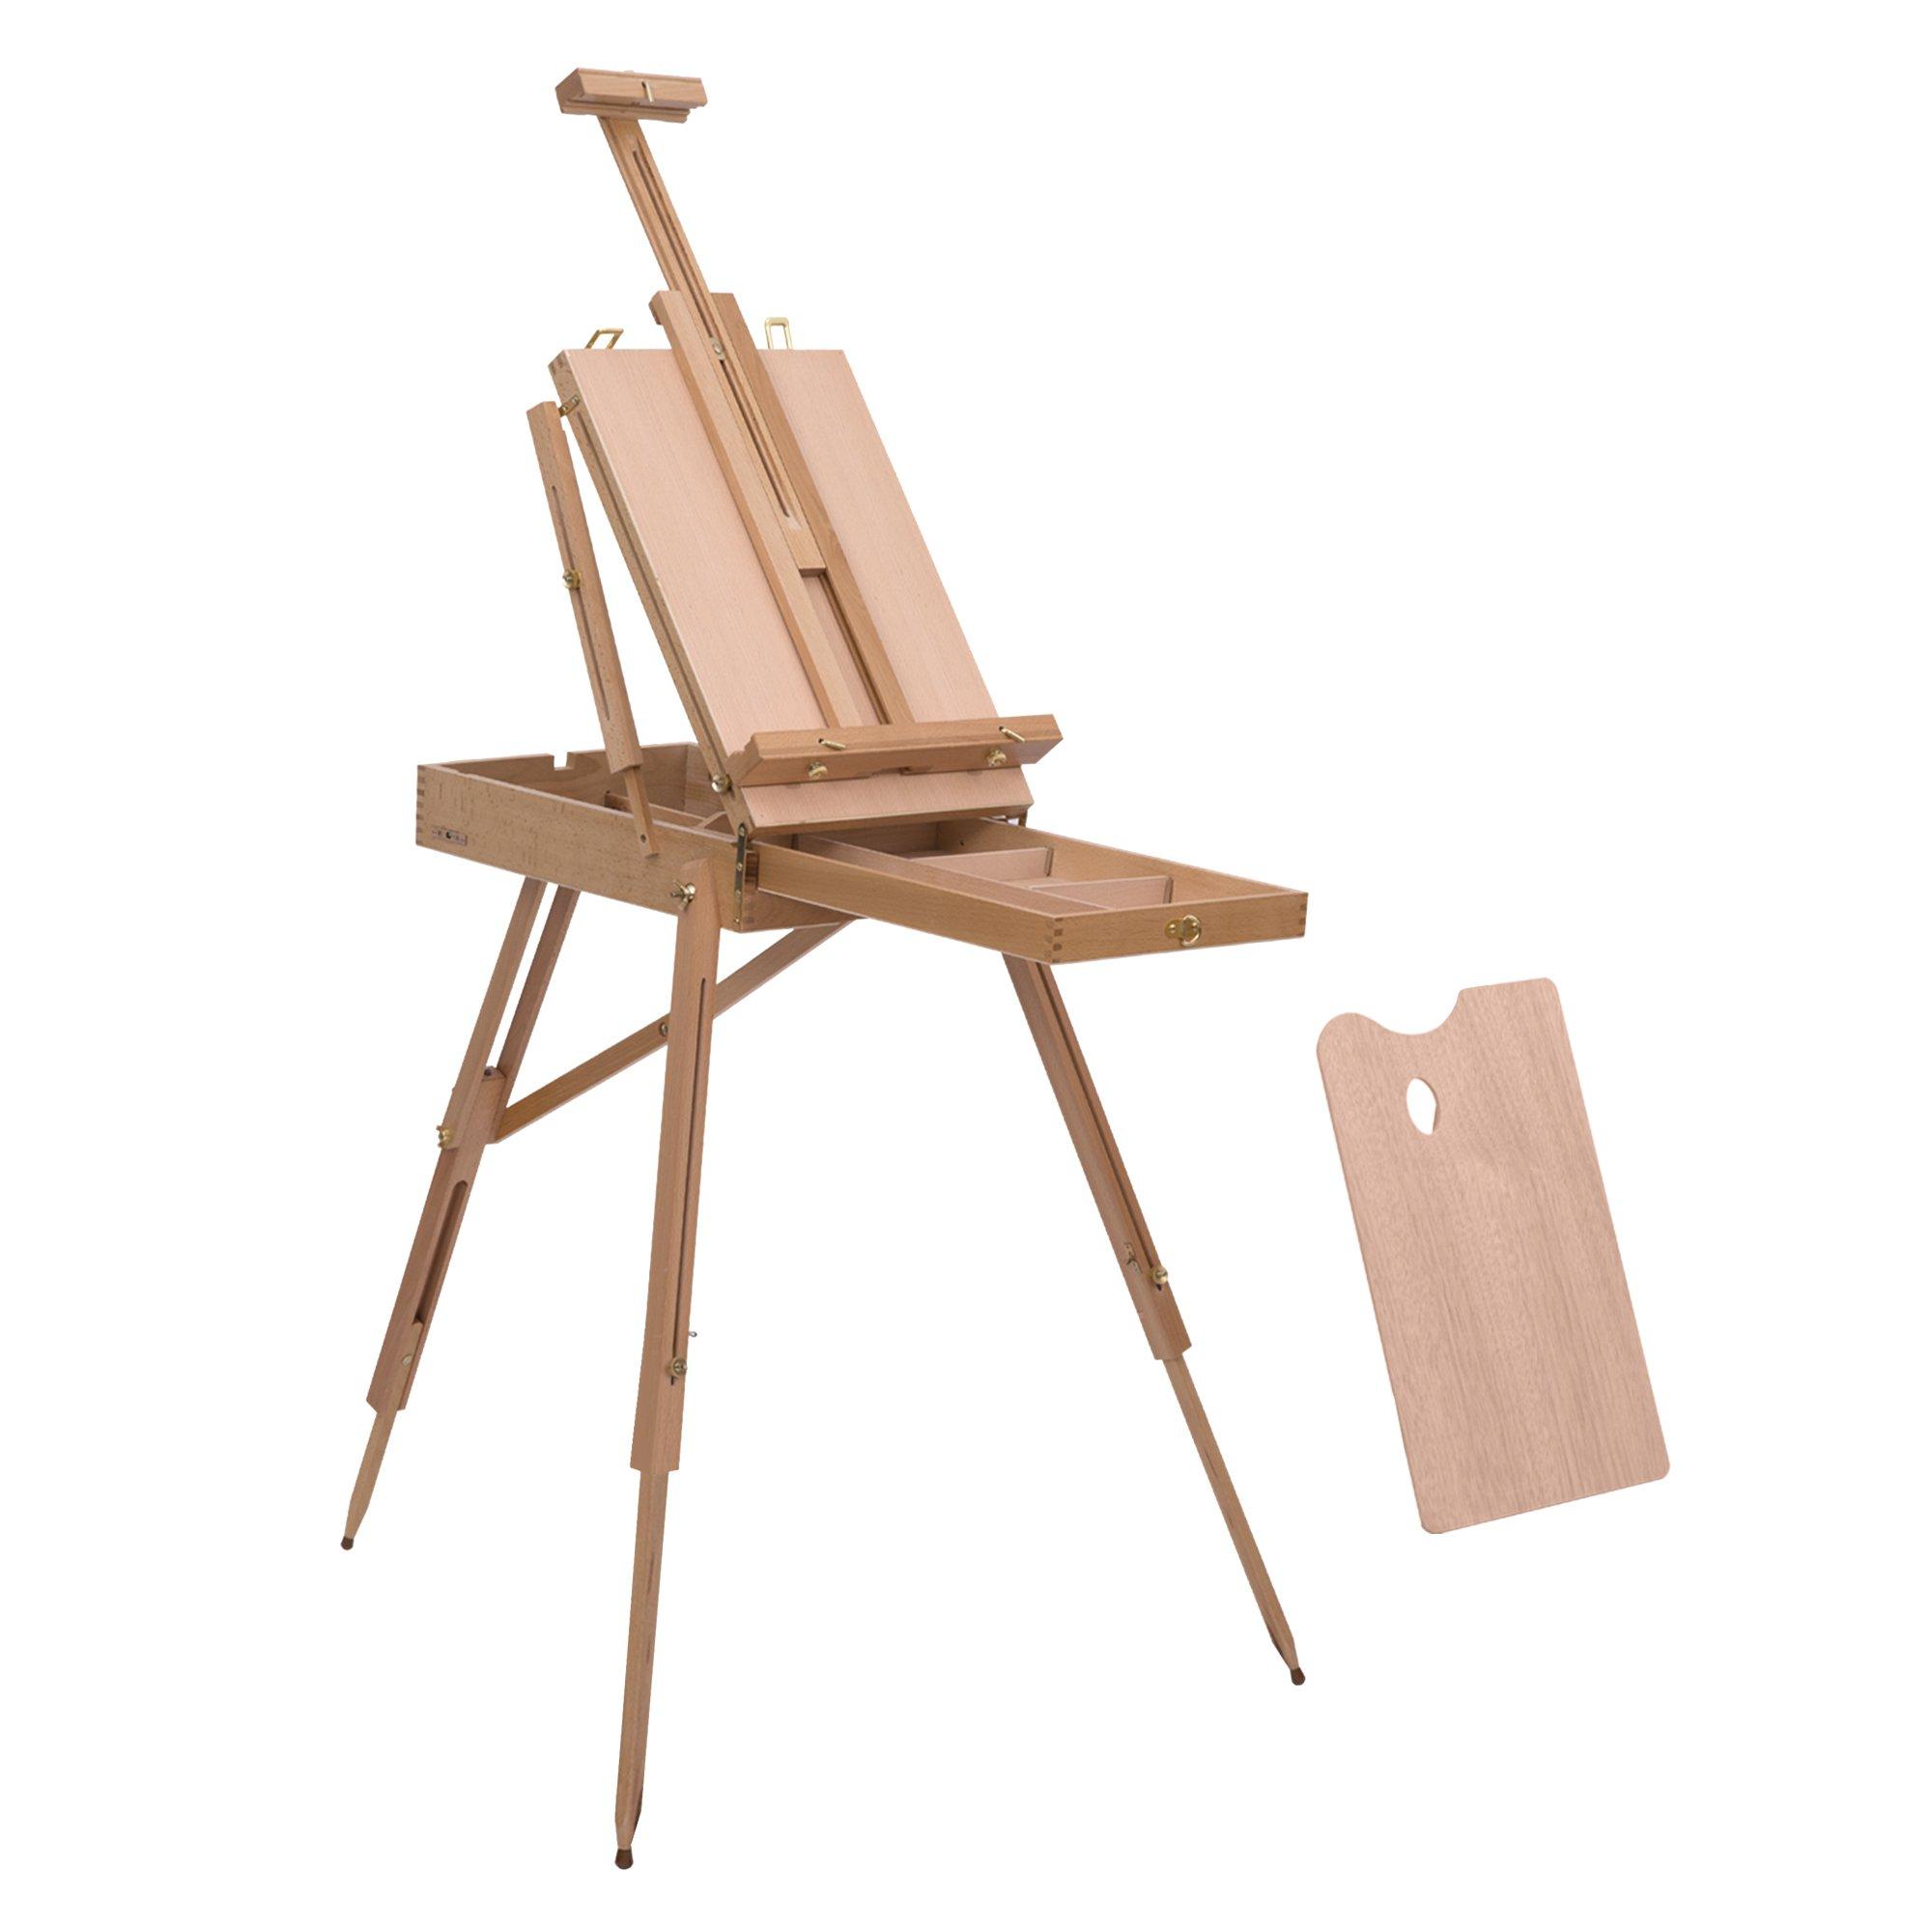 Wooden Tripod Art Easel Portable Sketch Drawing Box Artist Painting